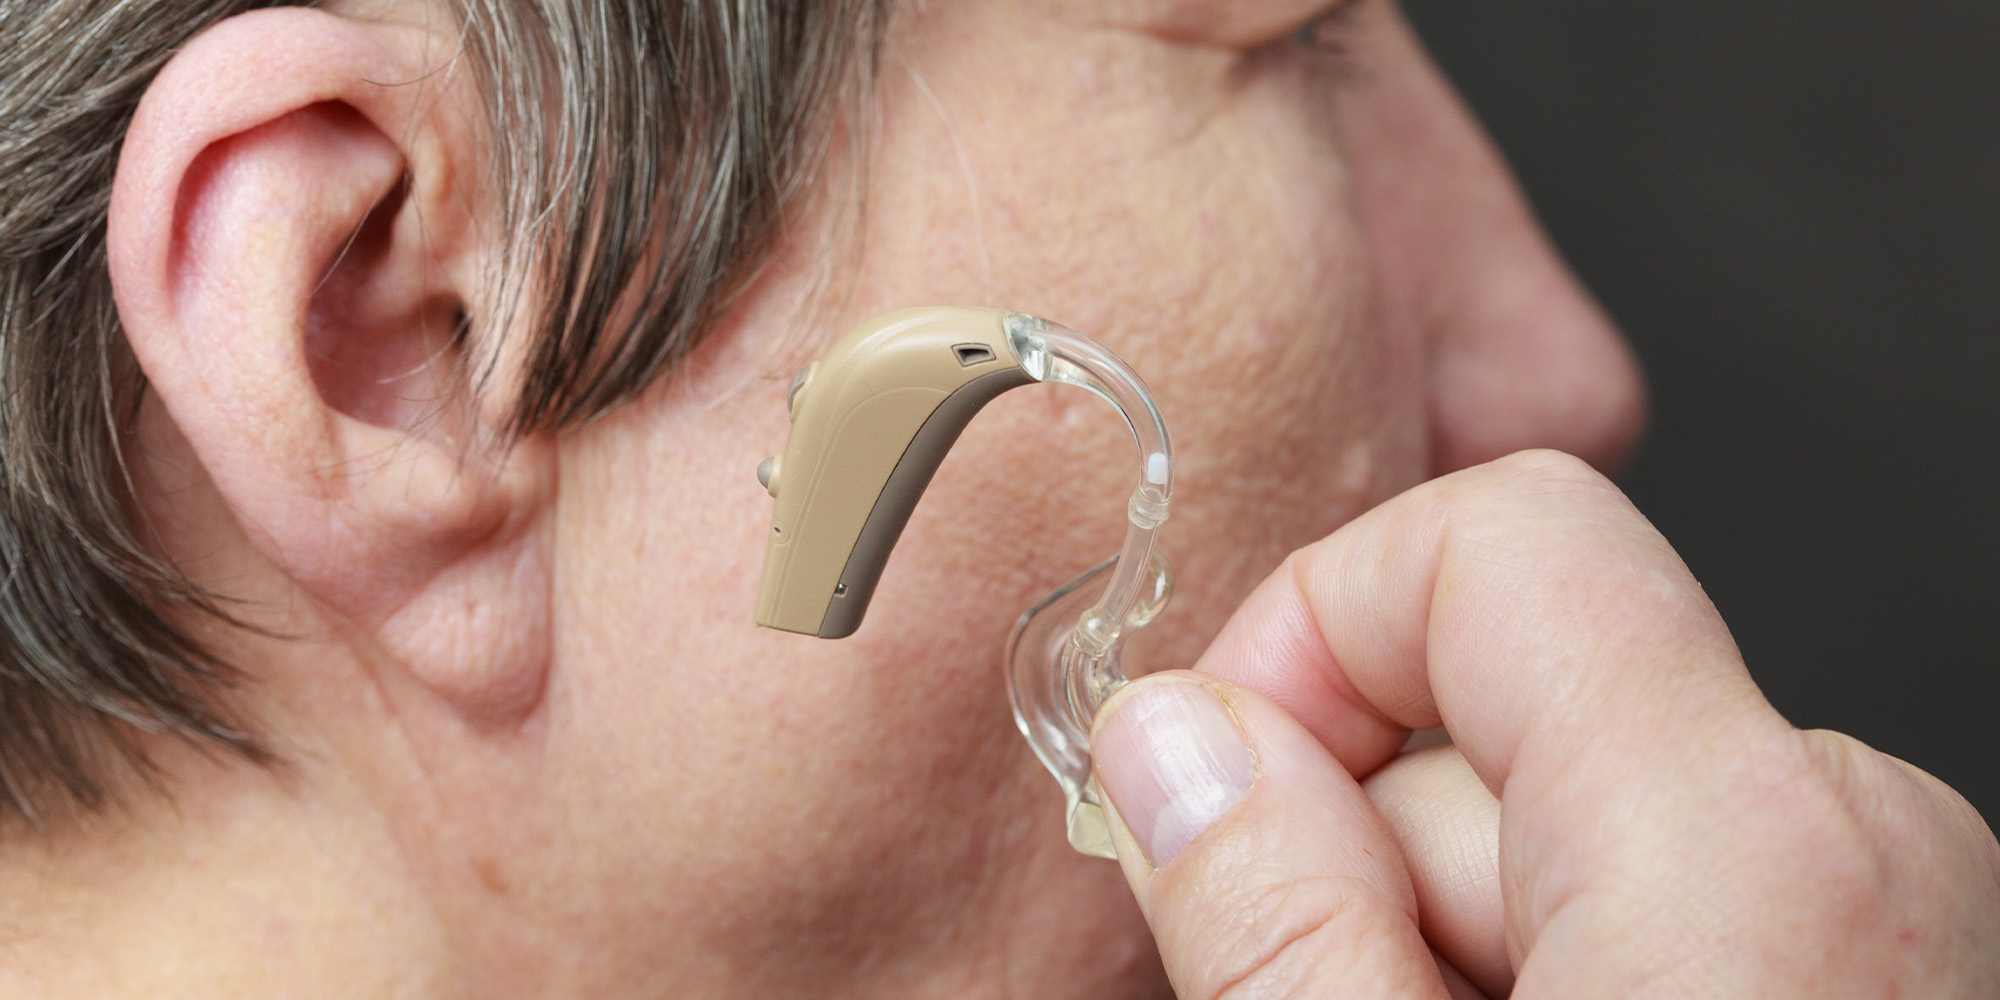 woman holding hearing aid up next to ear